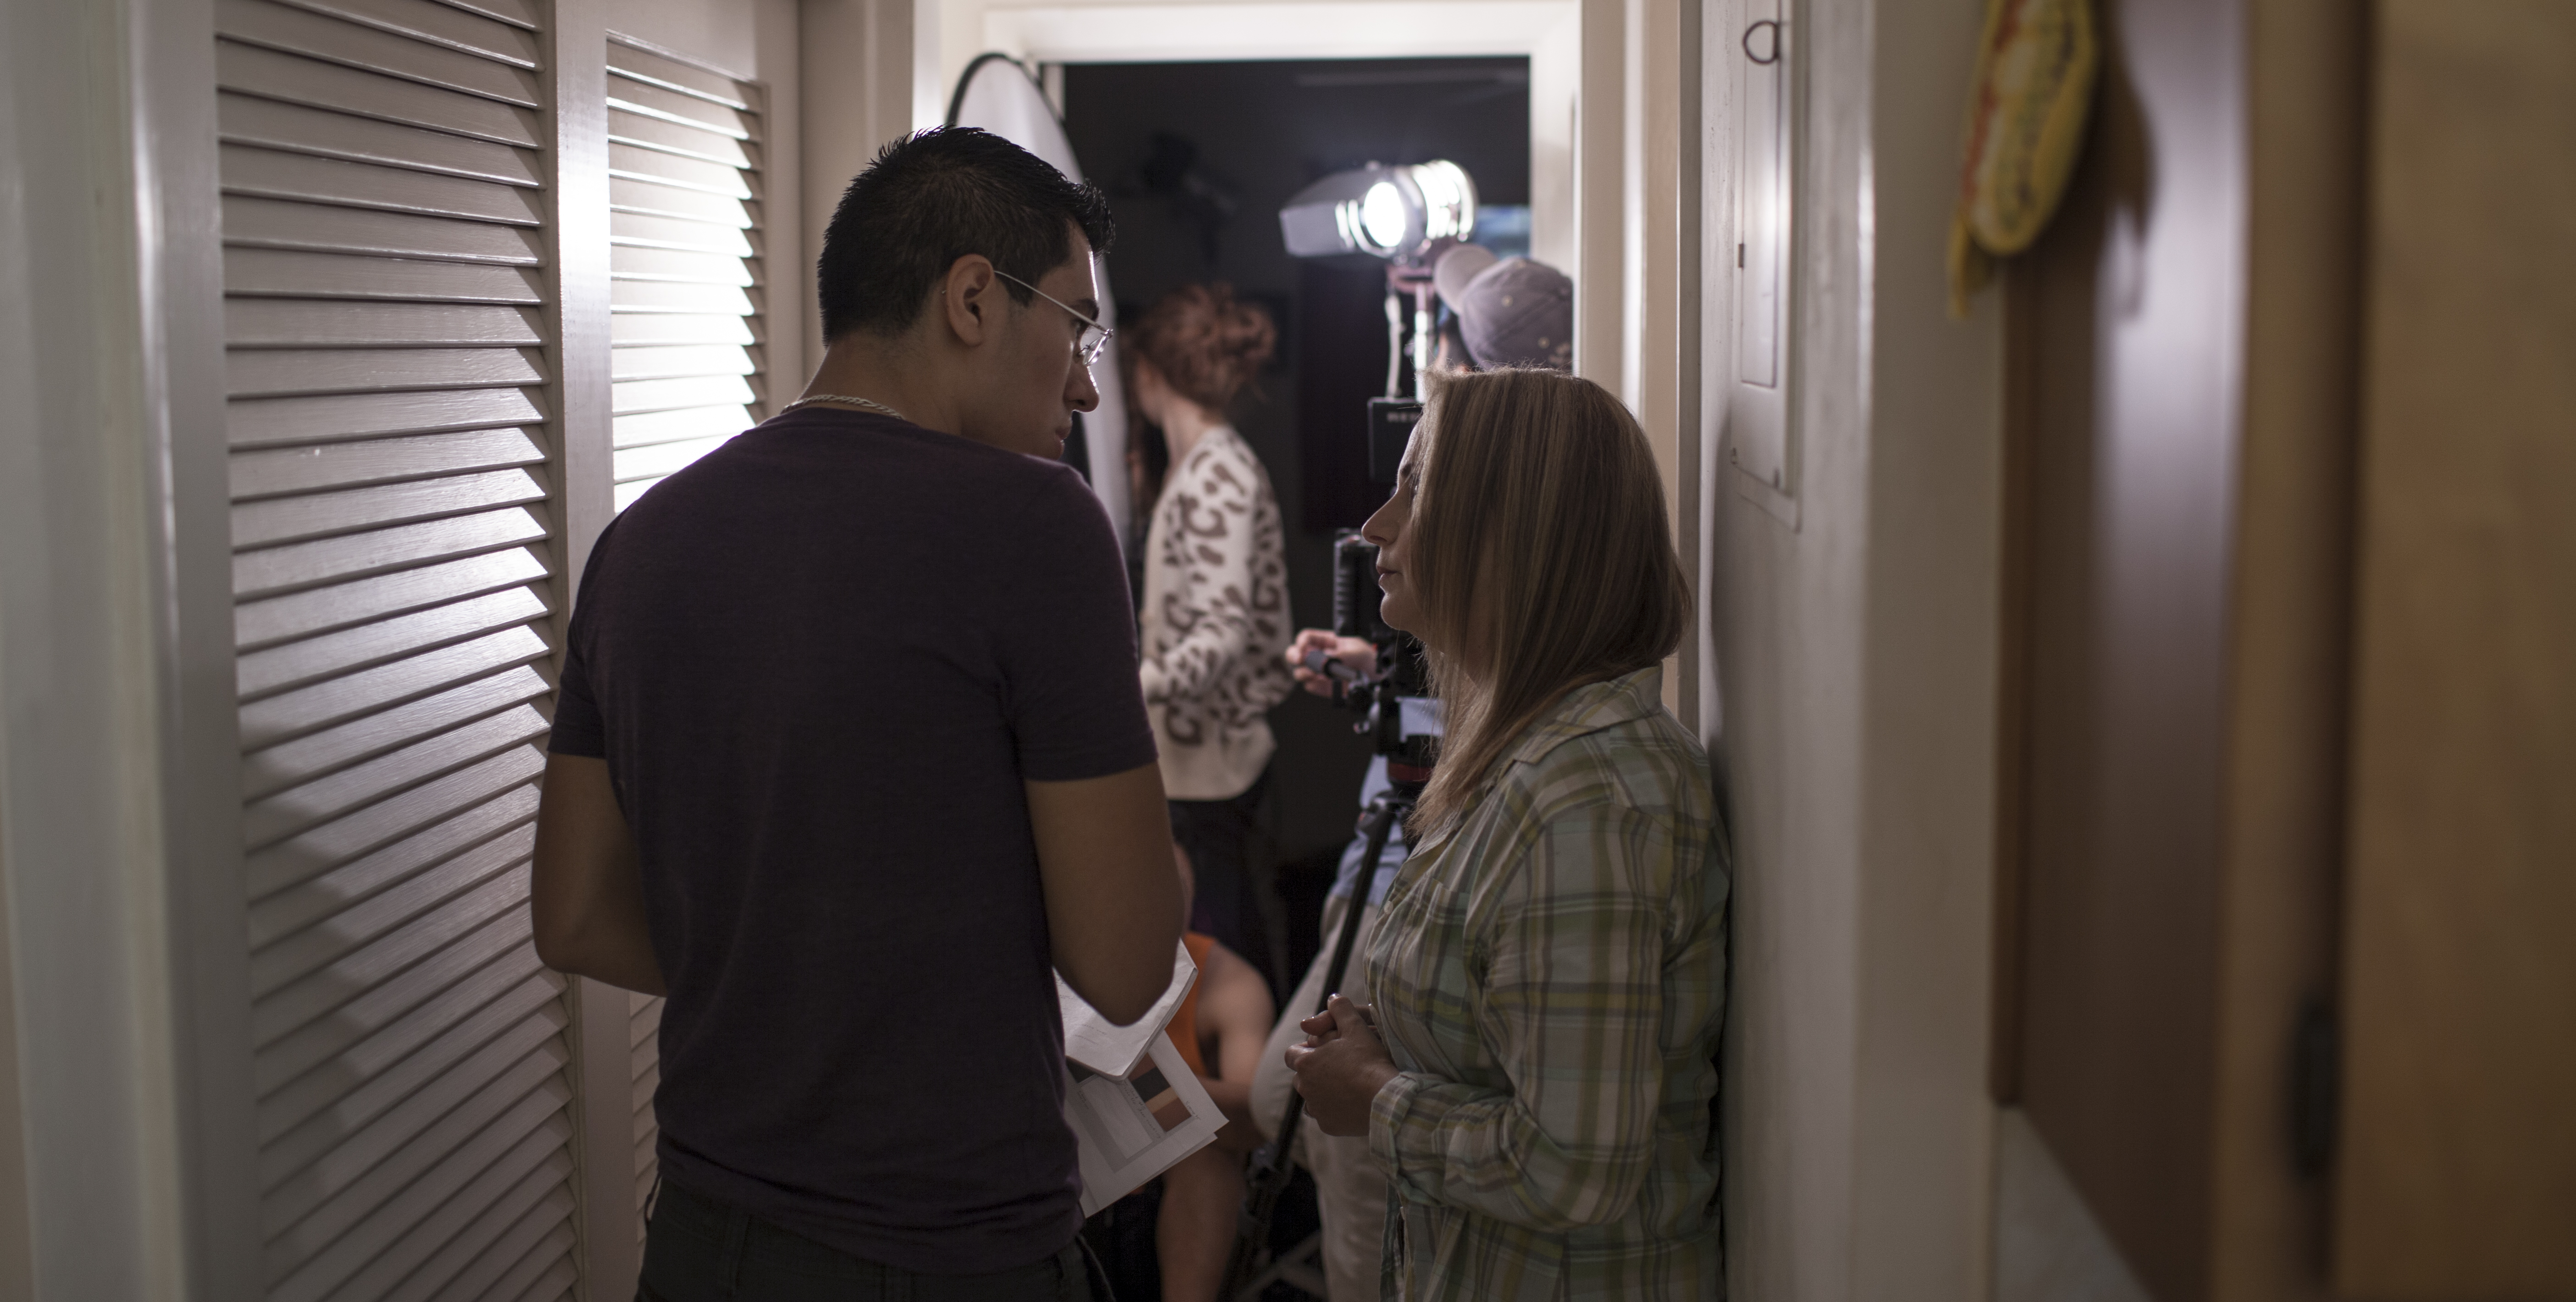 Krisstian de Lara with Julie Kendall going over the character's emotions during the production of the film 'Sub Rosa.'